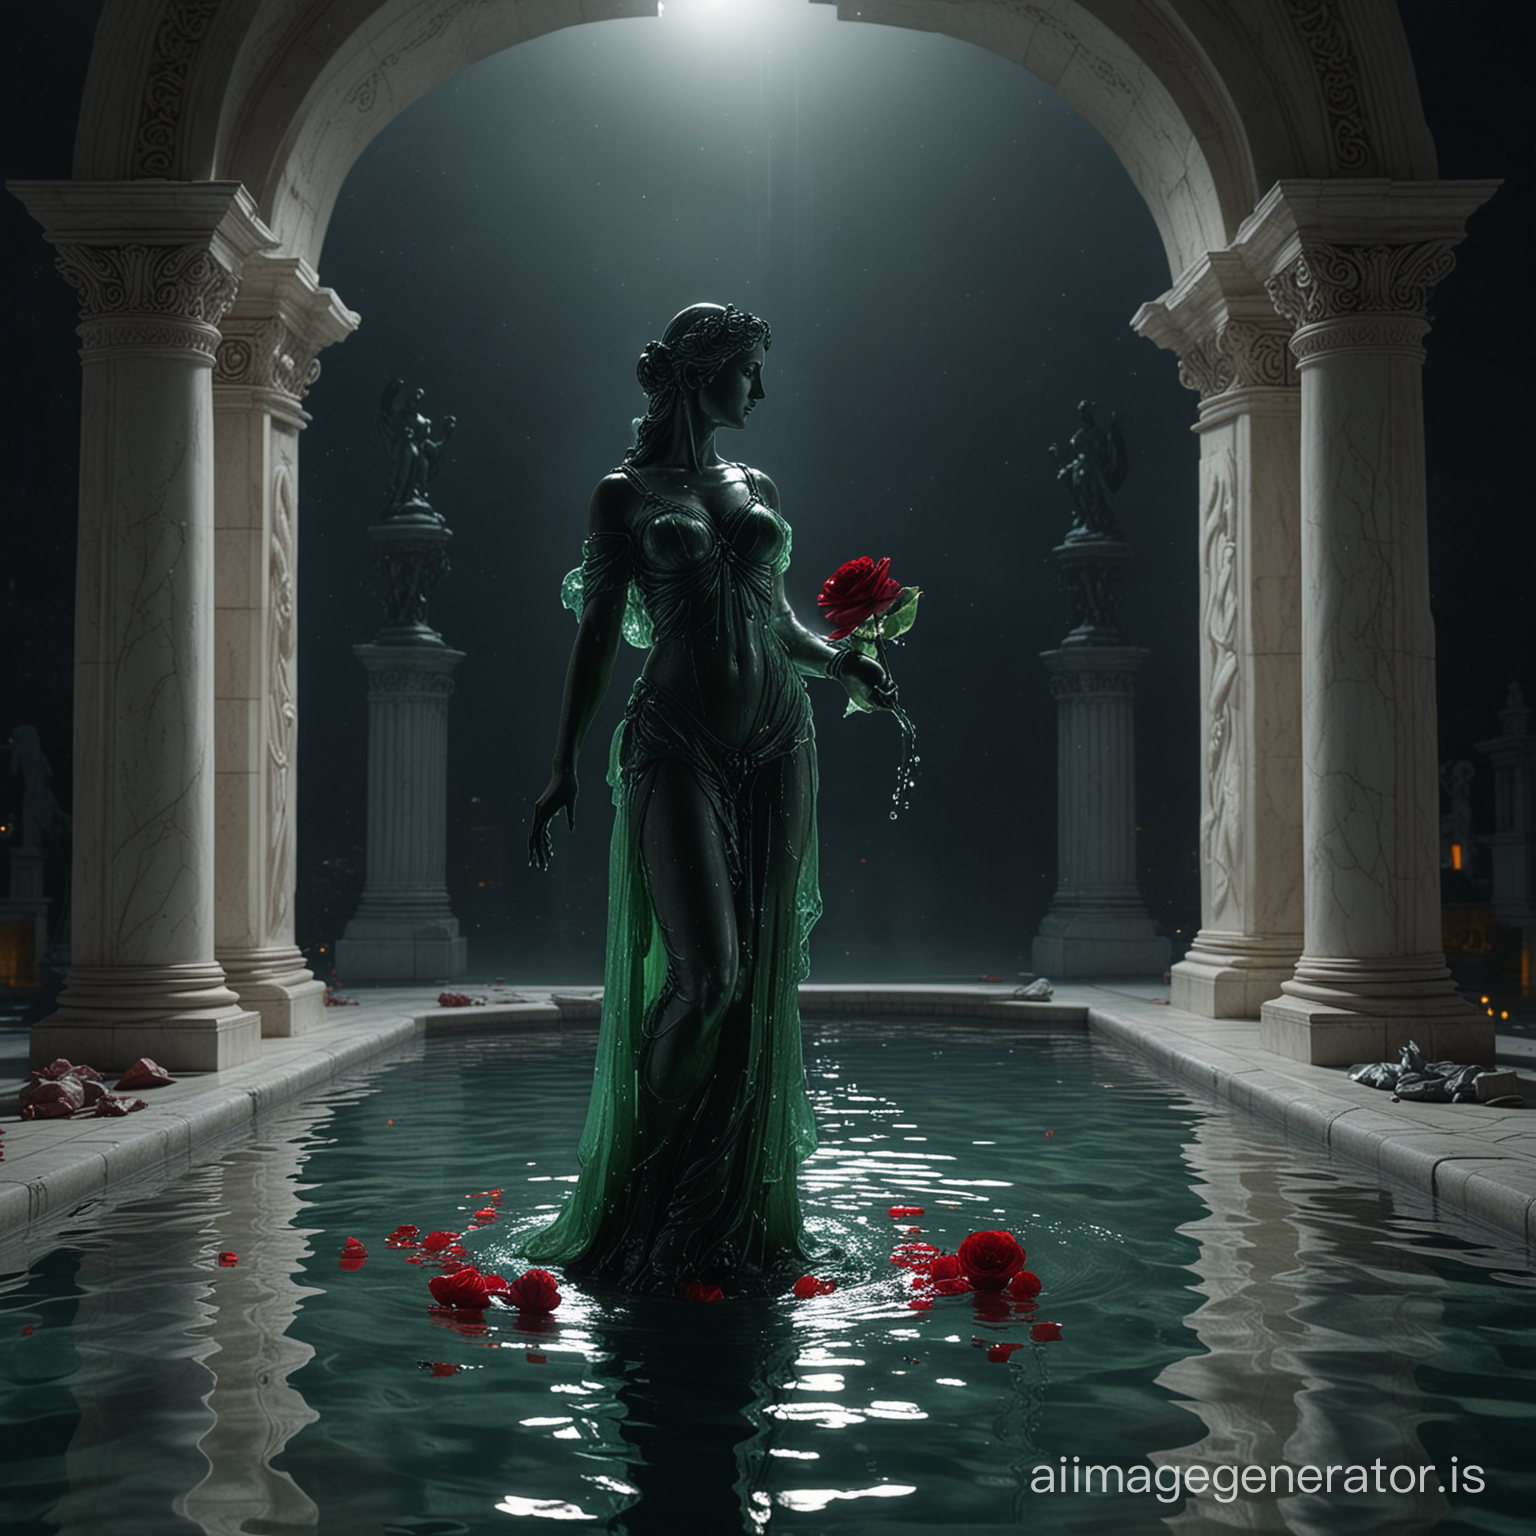 dark night lite by a large full moonlight with mista realistic statue of a princess goddess made of green clear glass holding a red glass rose standing under a marble arch in a clear pool of water in uhd 